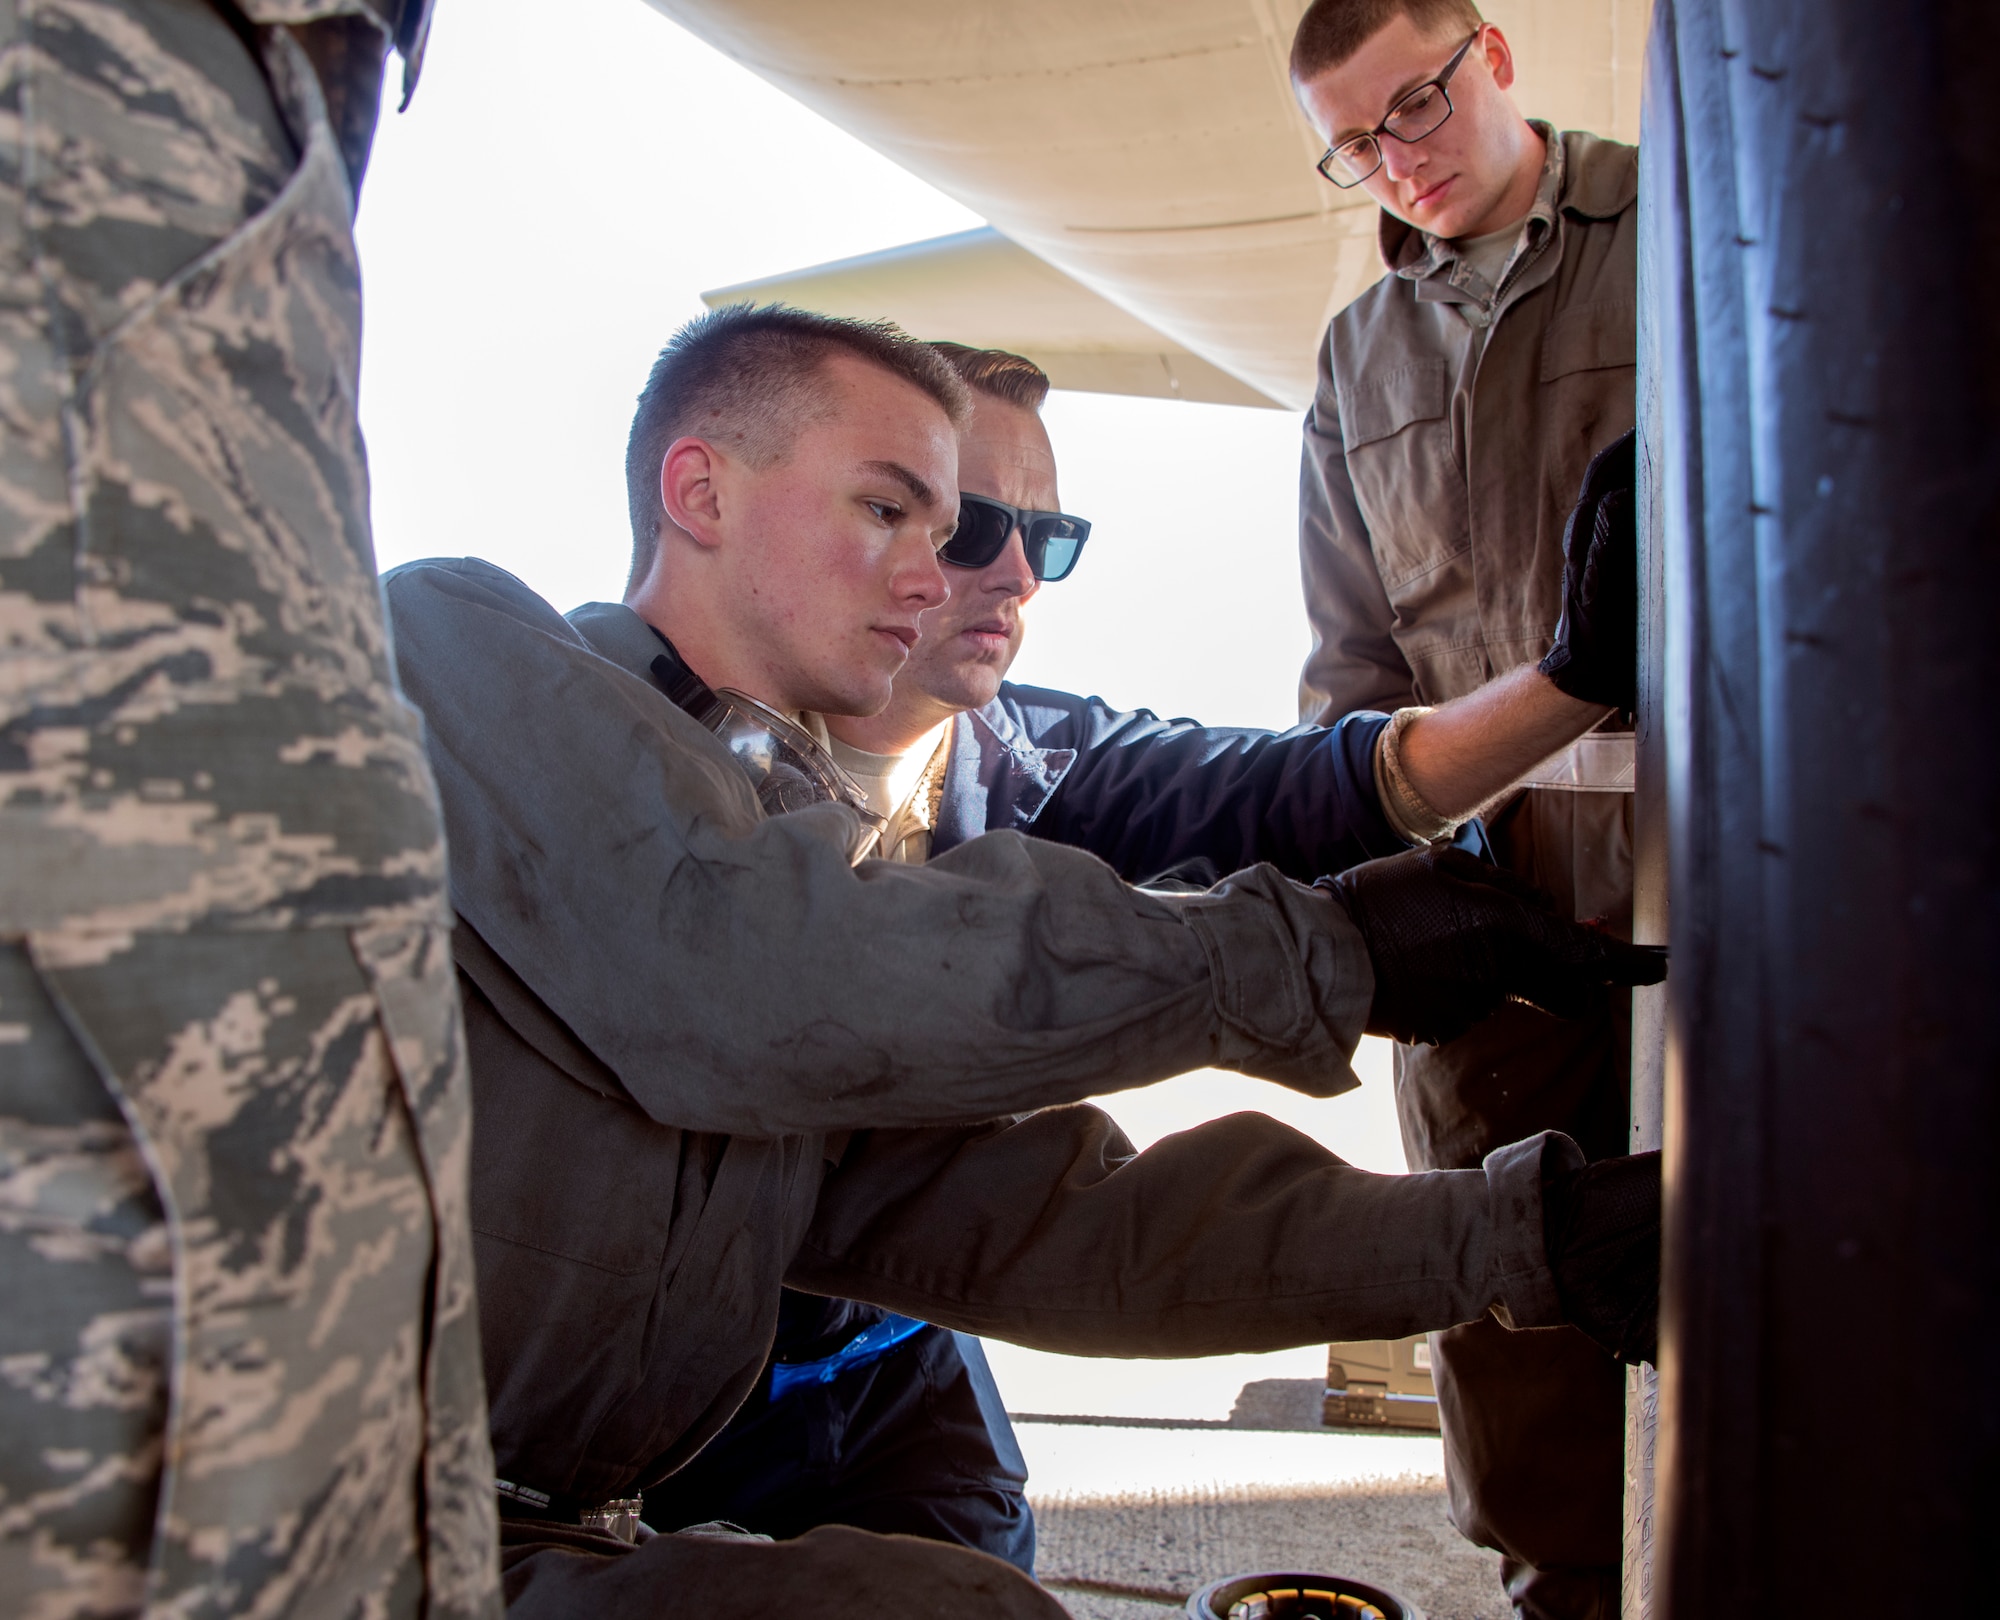 U.S. Air Force crew chief trainees change a tire on a KC-10 Extender, Feb. 7, 2018, Travis Air Force Base, Calif. The 373rd Training Squadron, Detachment 14, based out of Sheppard Air Force Base, Texas, trains crew chiefs, electricians, jet mechanics, avionics, air and ground equipment and hydraulics troops on aircraft maintenance and repair. (U.S. Air Force Photo by Heide Couch)